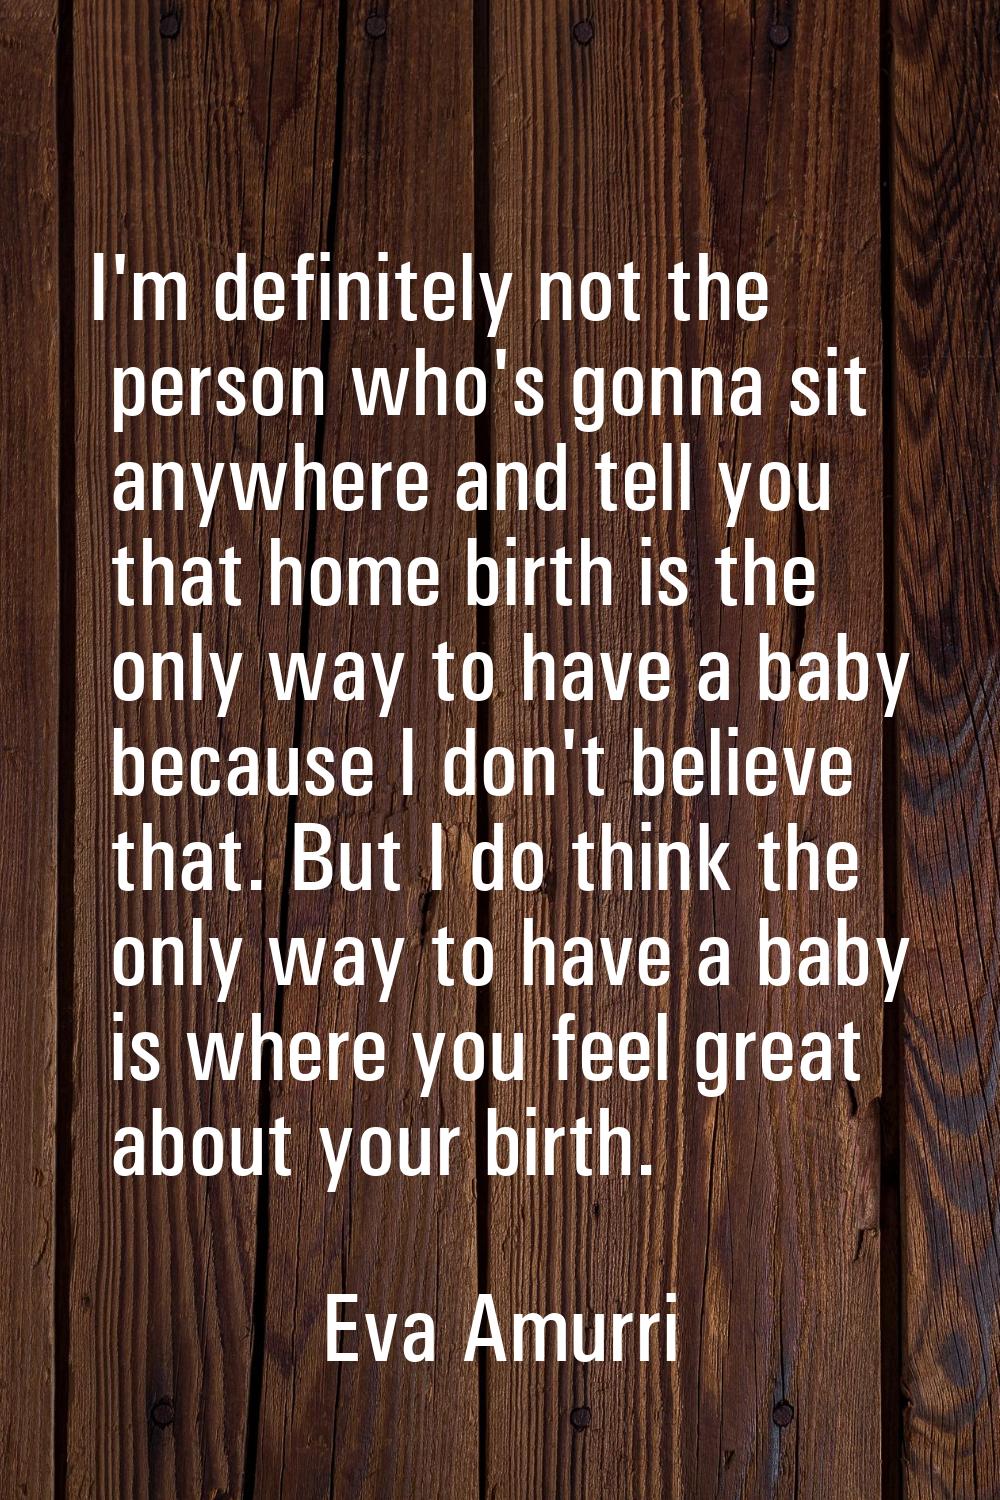 I'm definitely not the person who's gonna sit anywhere and tell you that home birth is the only way